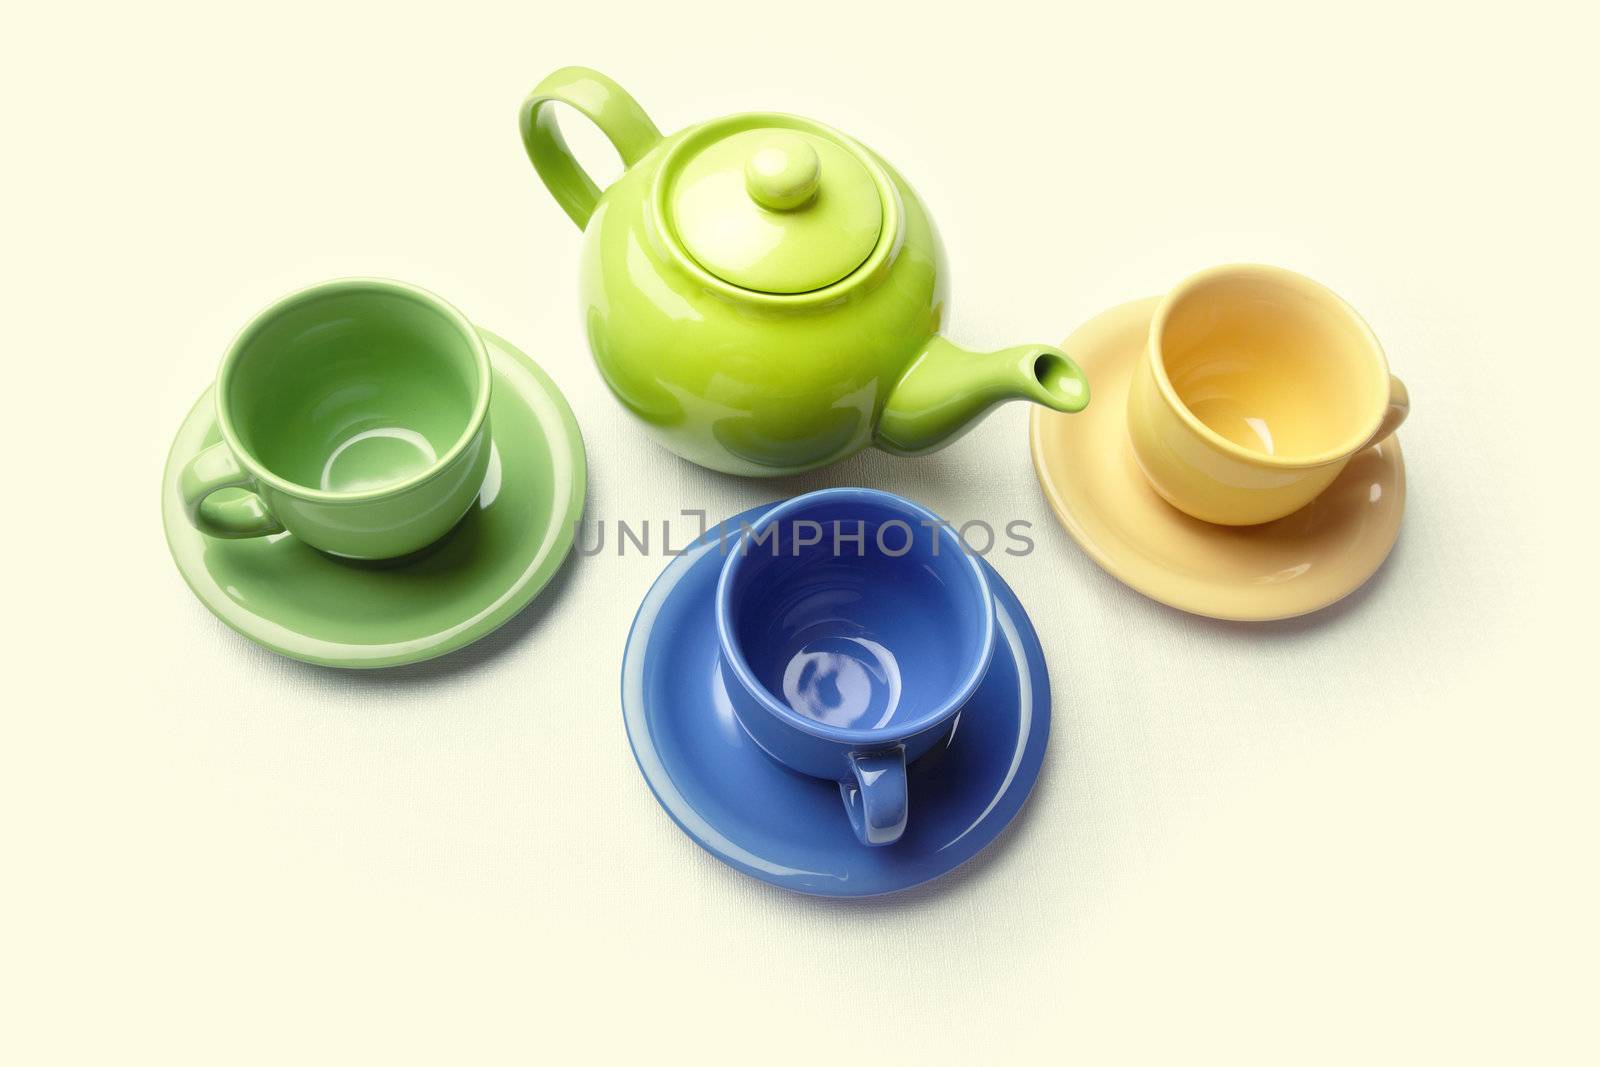 Teapot and teacups by Novic